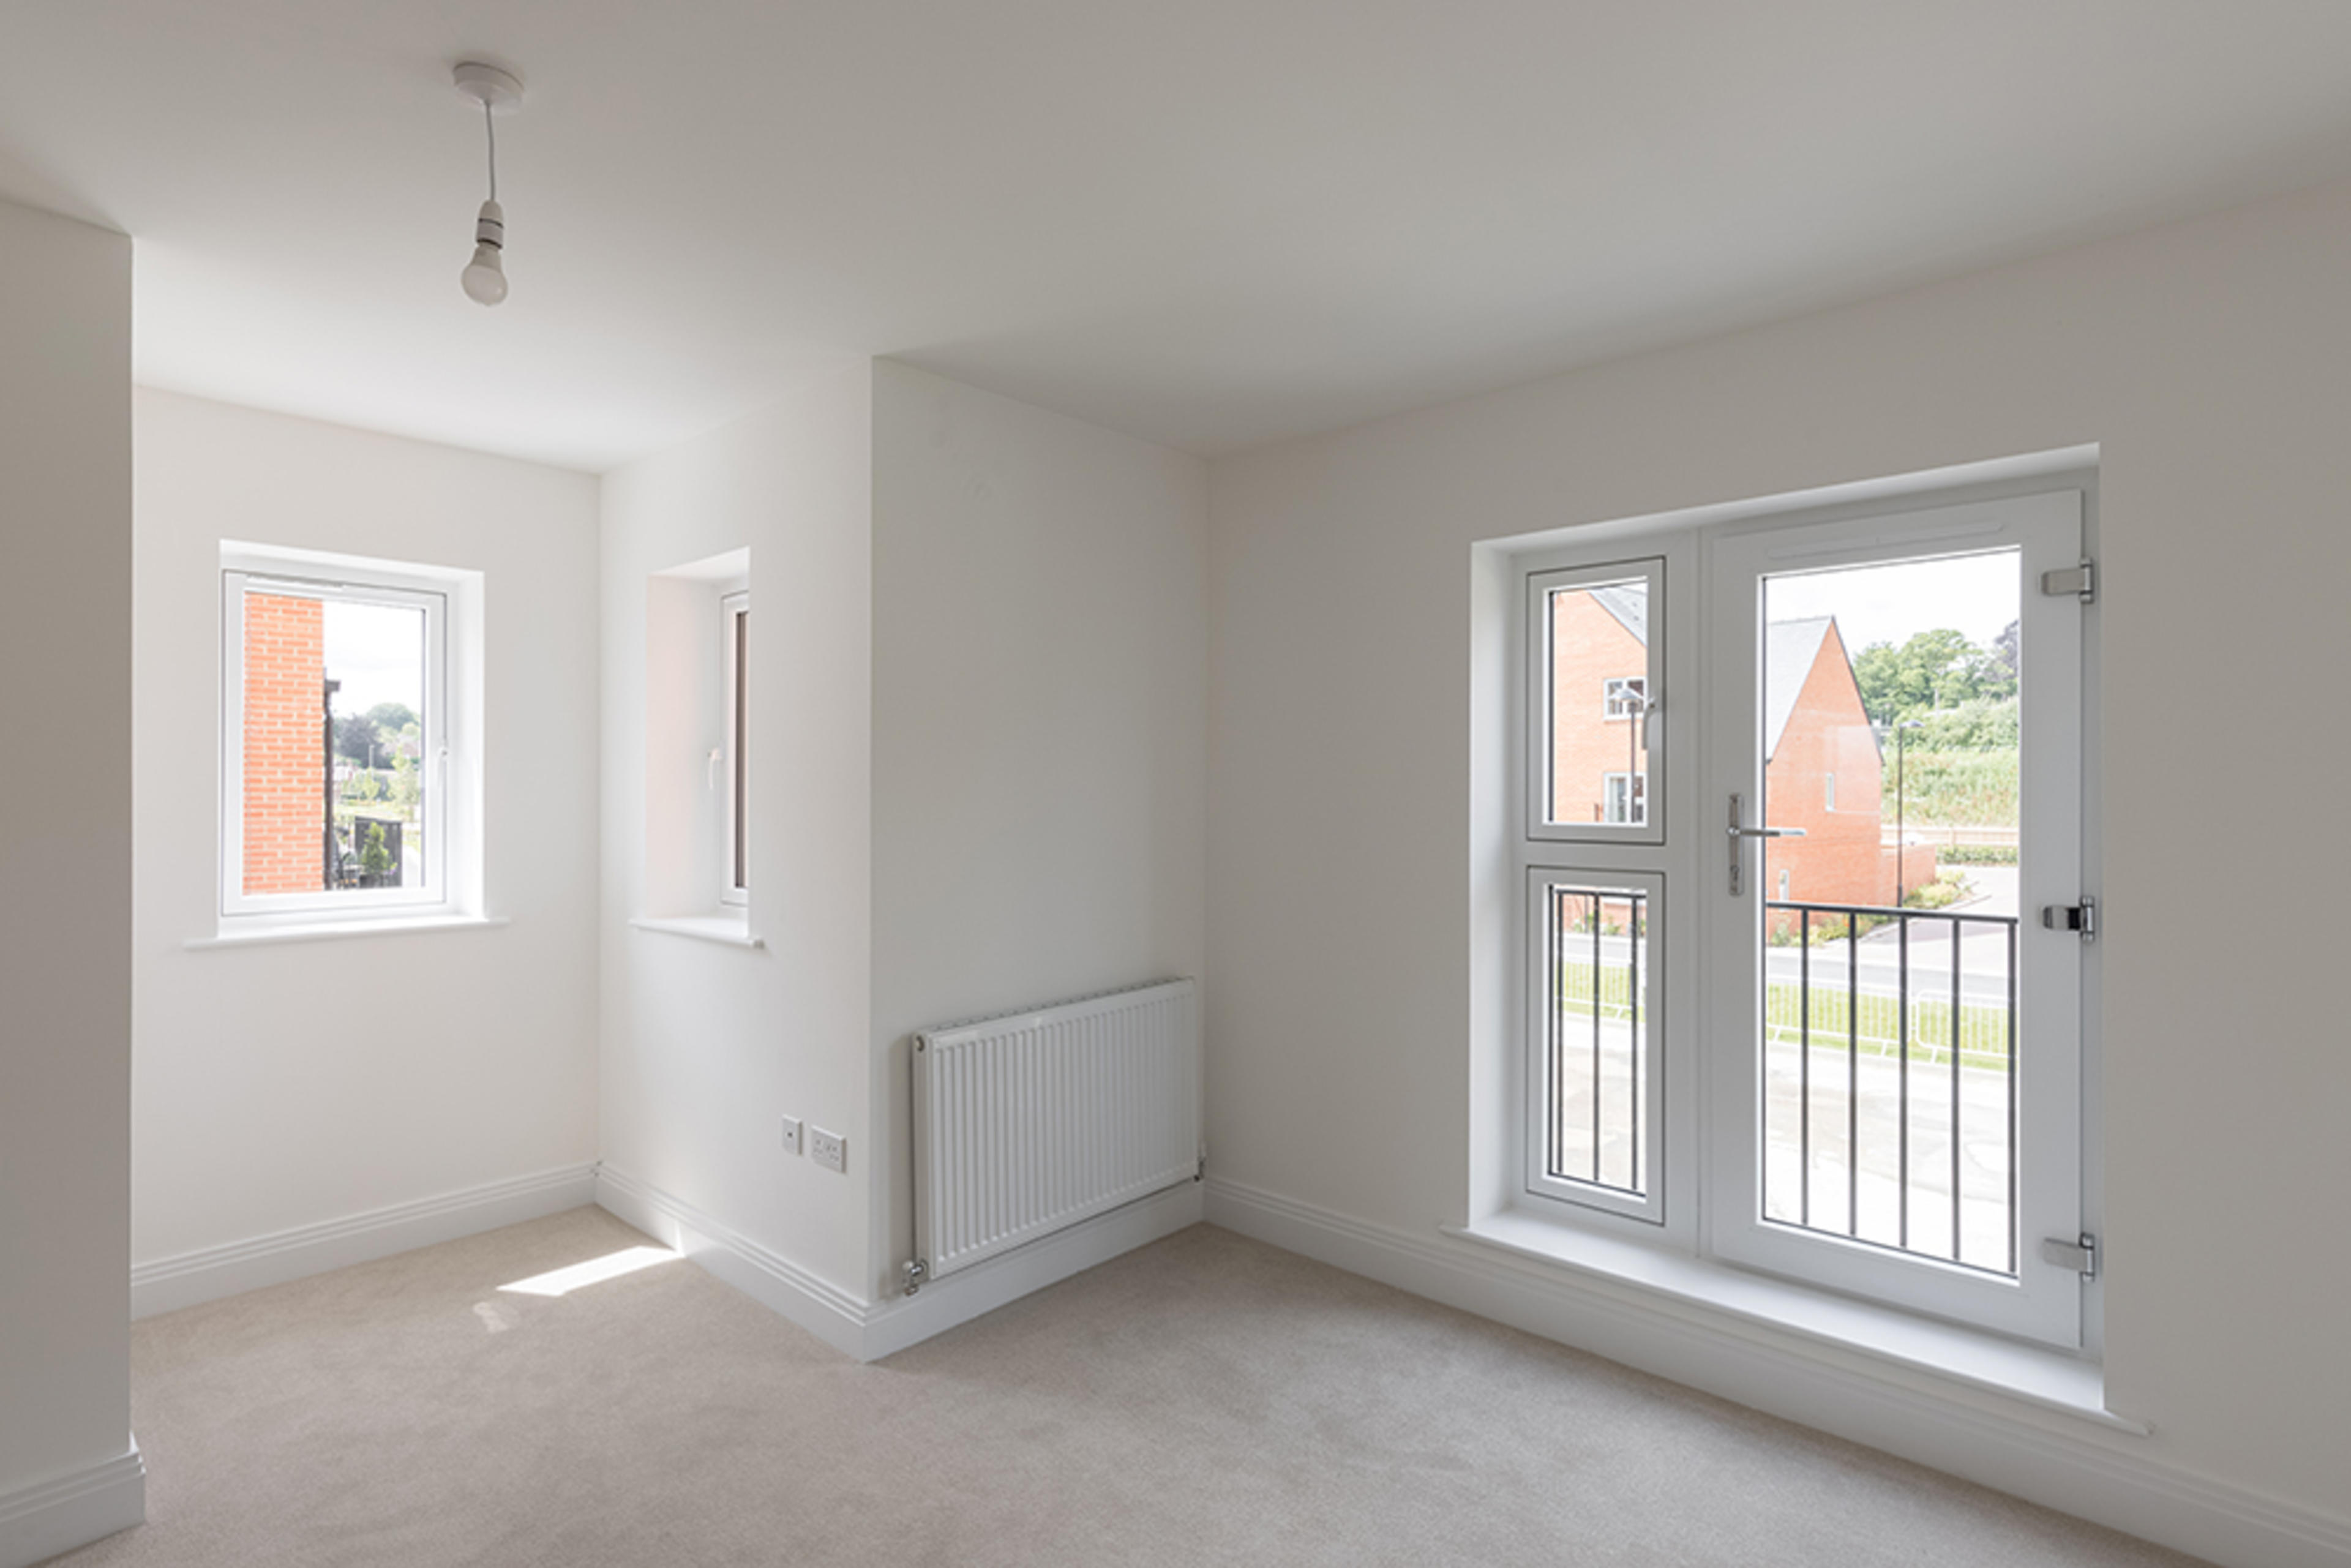 kings-barton-photography-shared-ownership-3-bed-master-bedroom